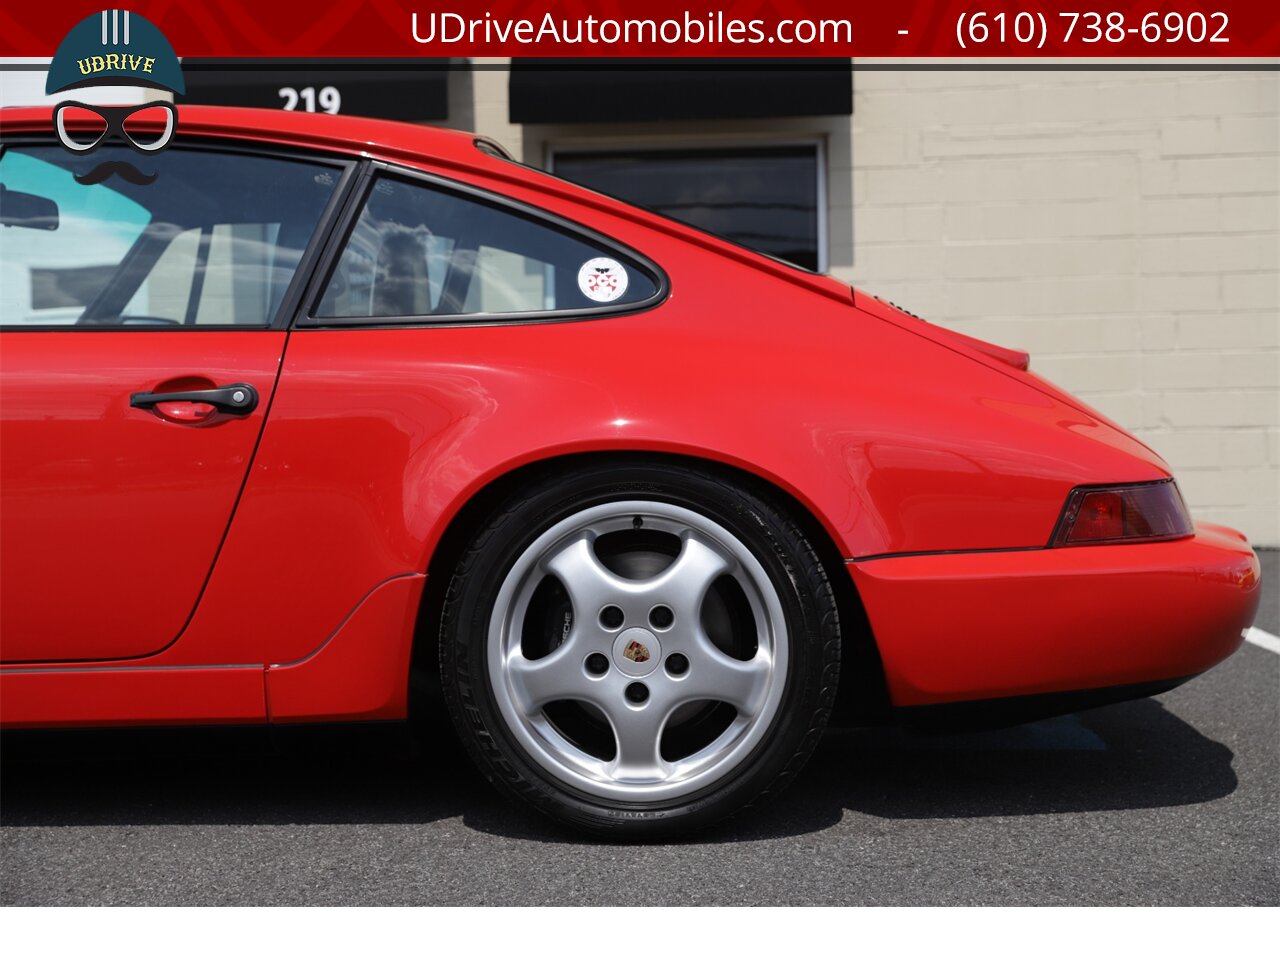 1989 Porsche 911 Carrera 4 964 C4 5 Speed Engine Rebuild  $40k in Service History Cup 1 Wheels - Photo 19 - West Chester, PA 19382